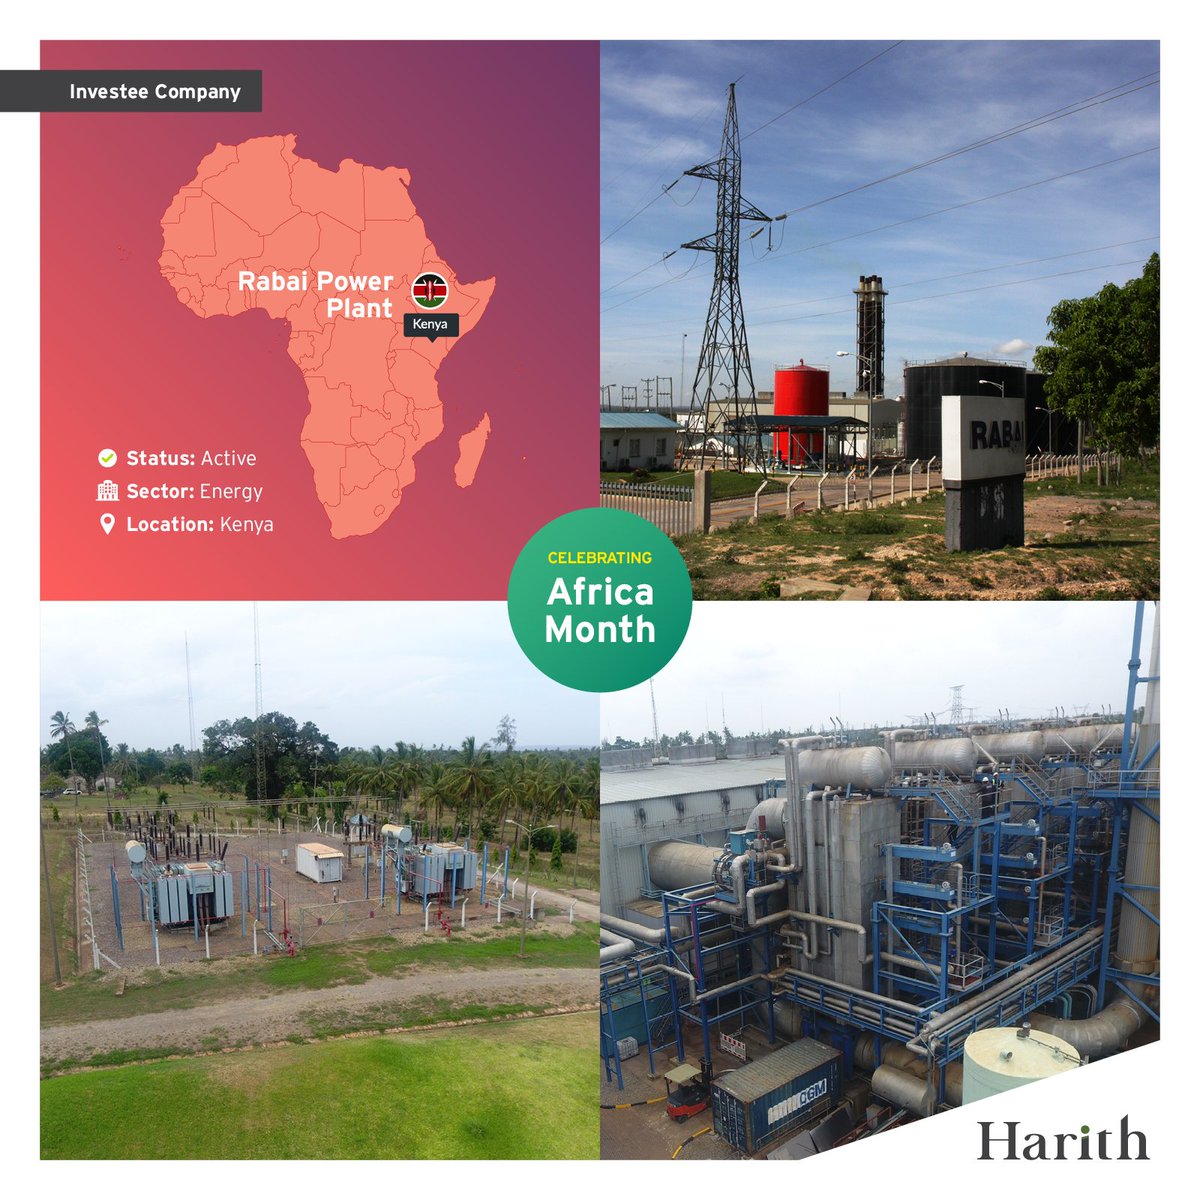 Harith's investment in Rabai Power Plant, a 90MW thermal-power facility in Kenya, demonstrates our commitment to energy in Africa. @anergi_group 's role was pivotal in its success. harith.africa/portfolio/ #HarithInvestsAfrica #Kenya #AfricaMonth